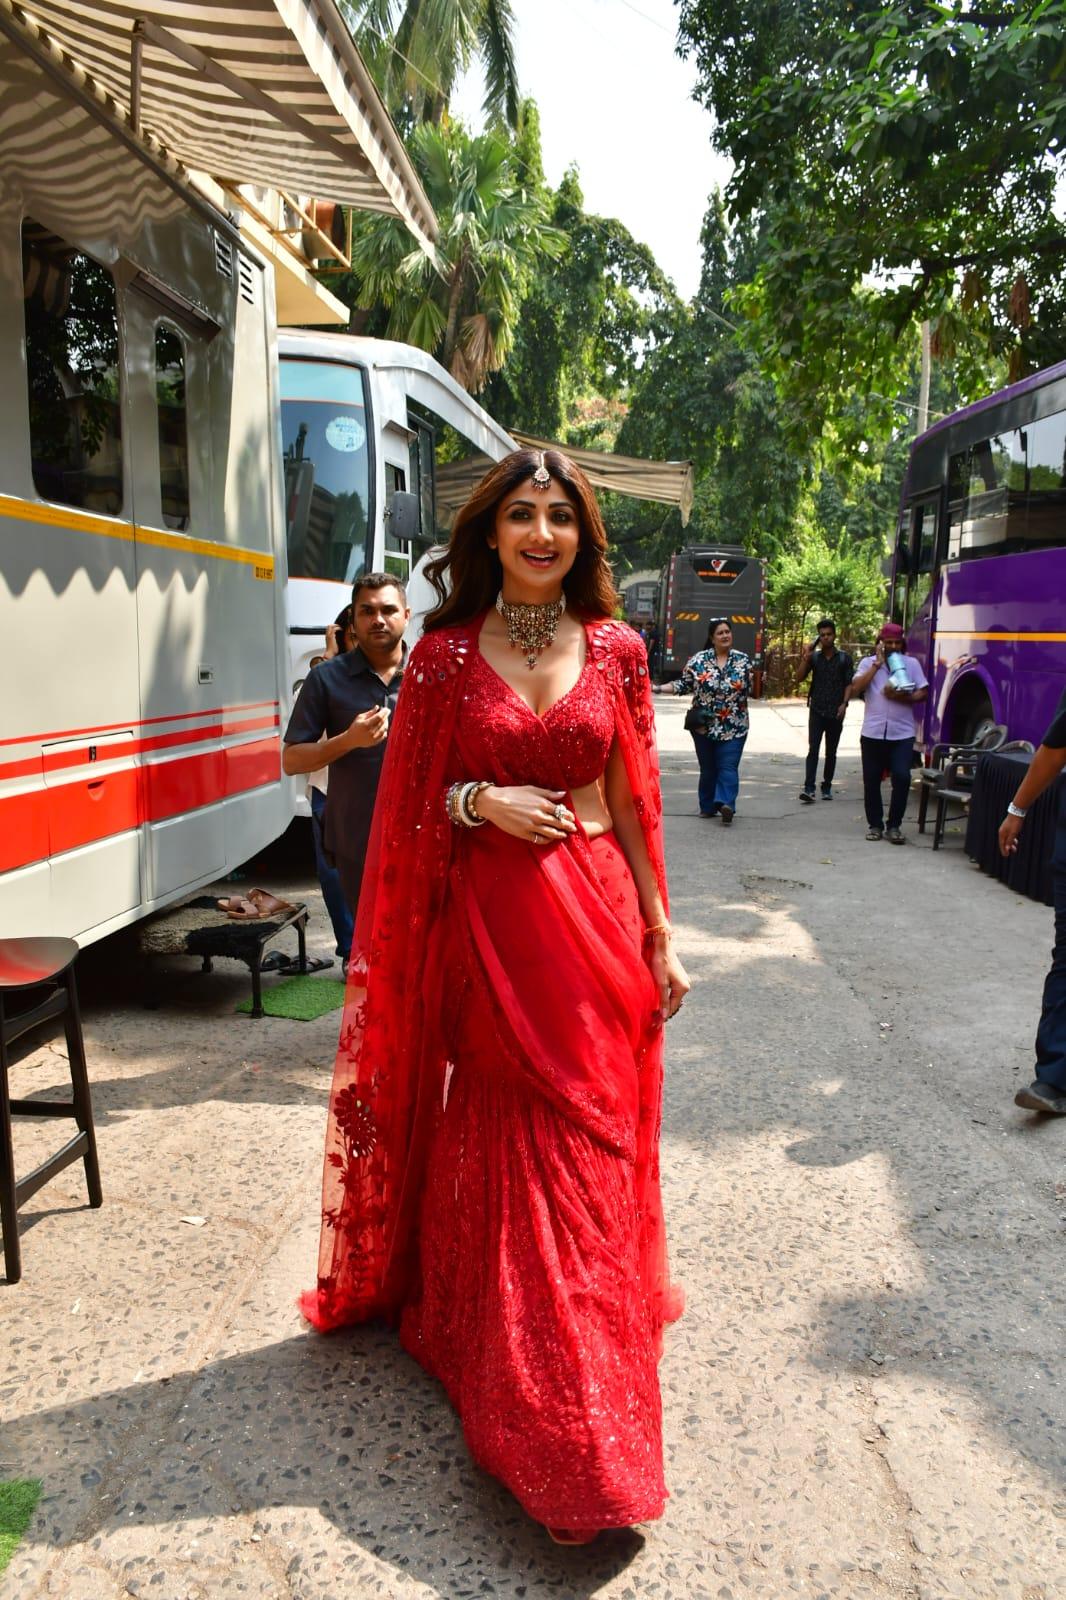 Shilpa Shetty looked stunning in a red saree as she was snapped in the city